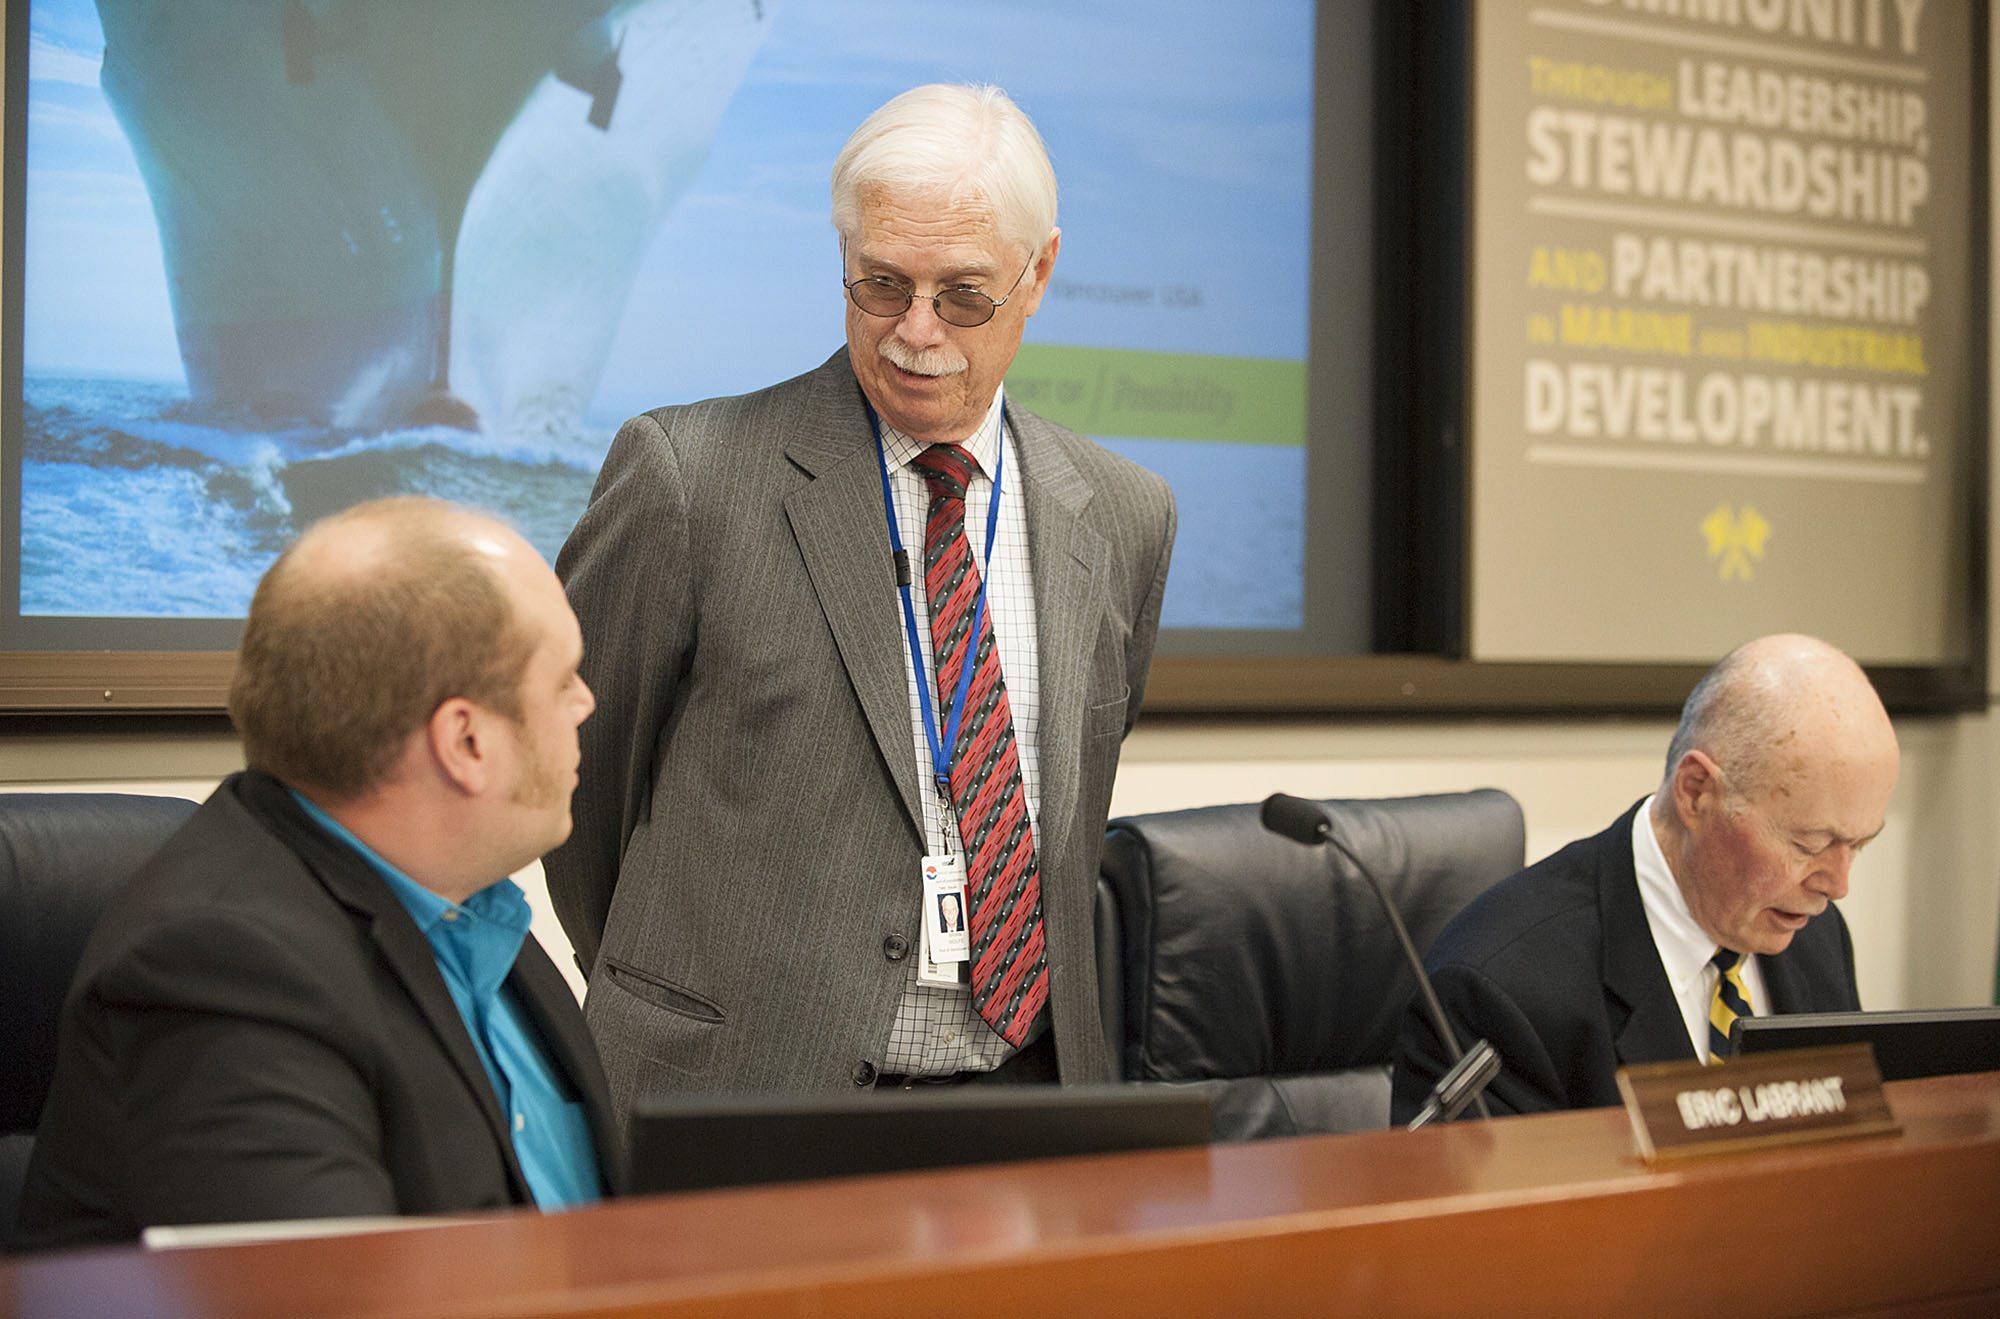 Port Commissioners Eric LaBrant, from left, and Brian Wolfe chat before the meeting as fellow Commissioner Jerry Oliver works nearby Friday afternoon, April 15, 2016 at the Port of Vancouver.